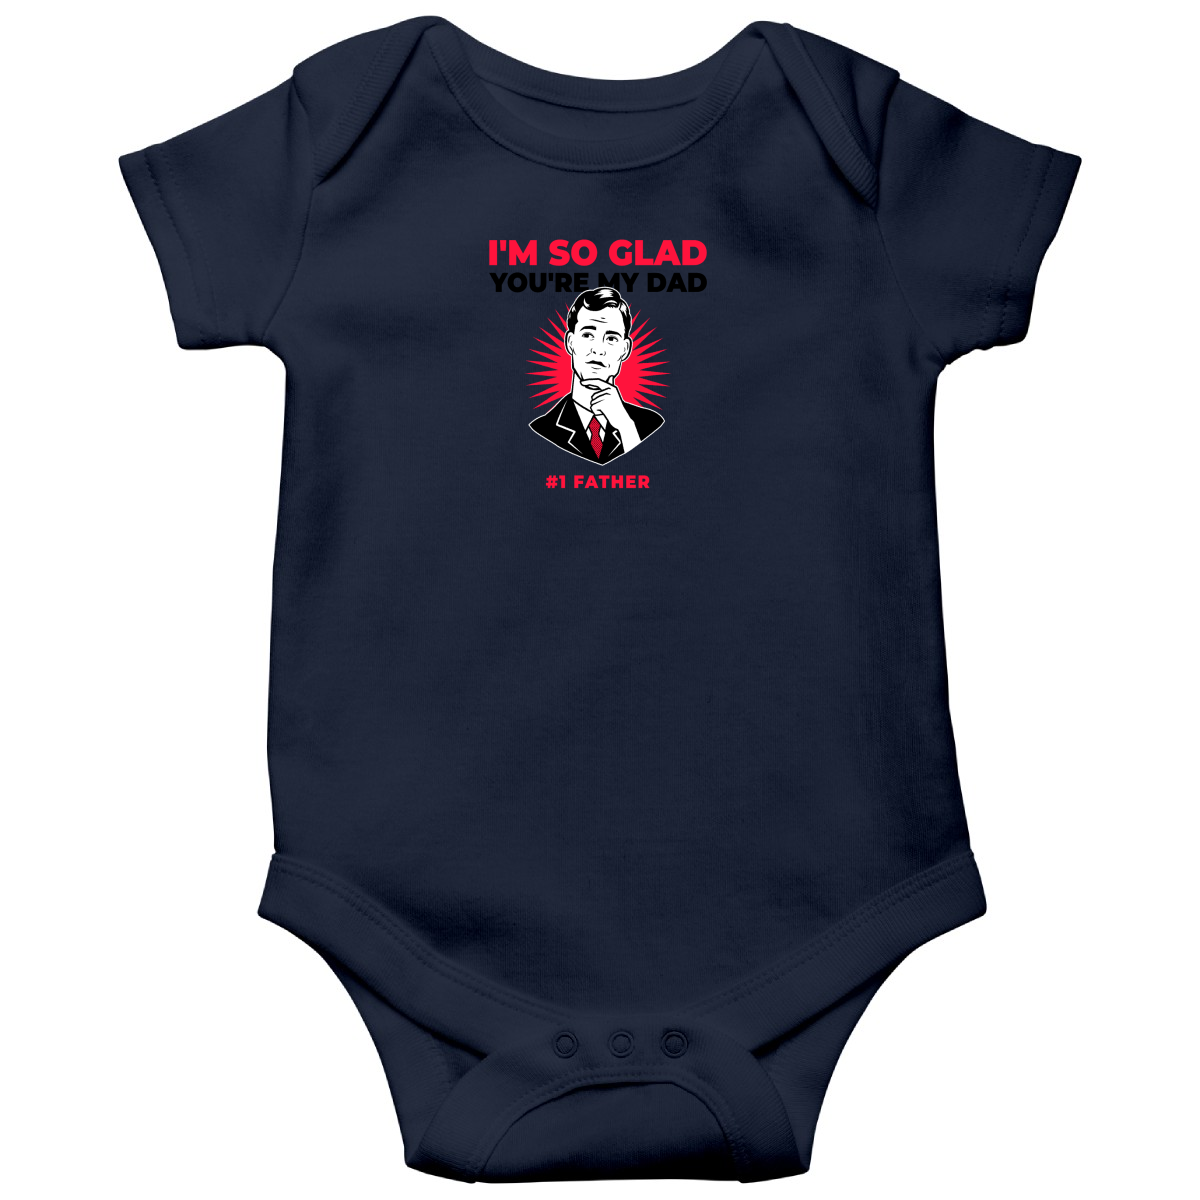 I'm so glad you are my dad Baby Bodysuits | Navy